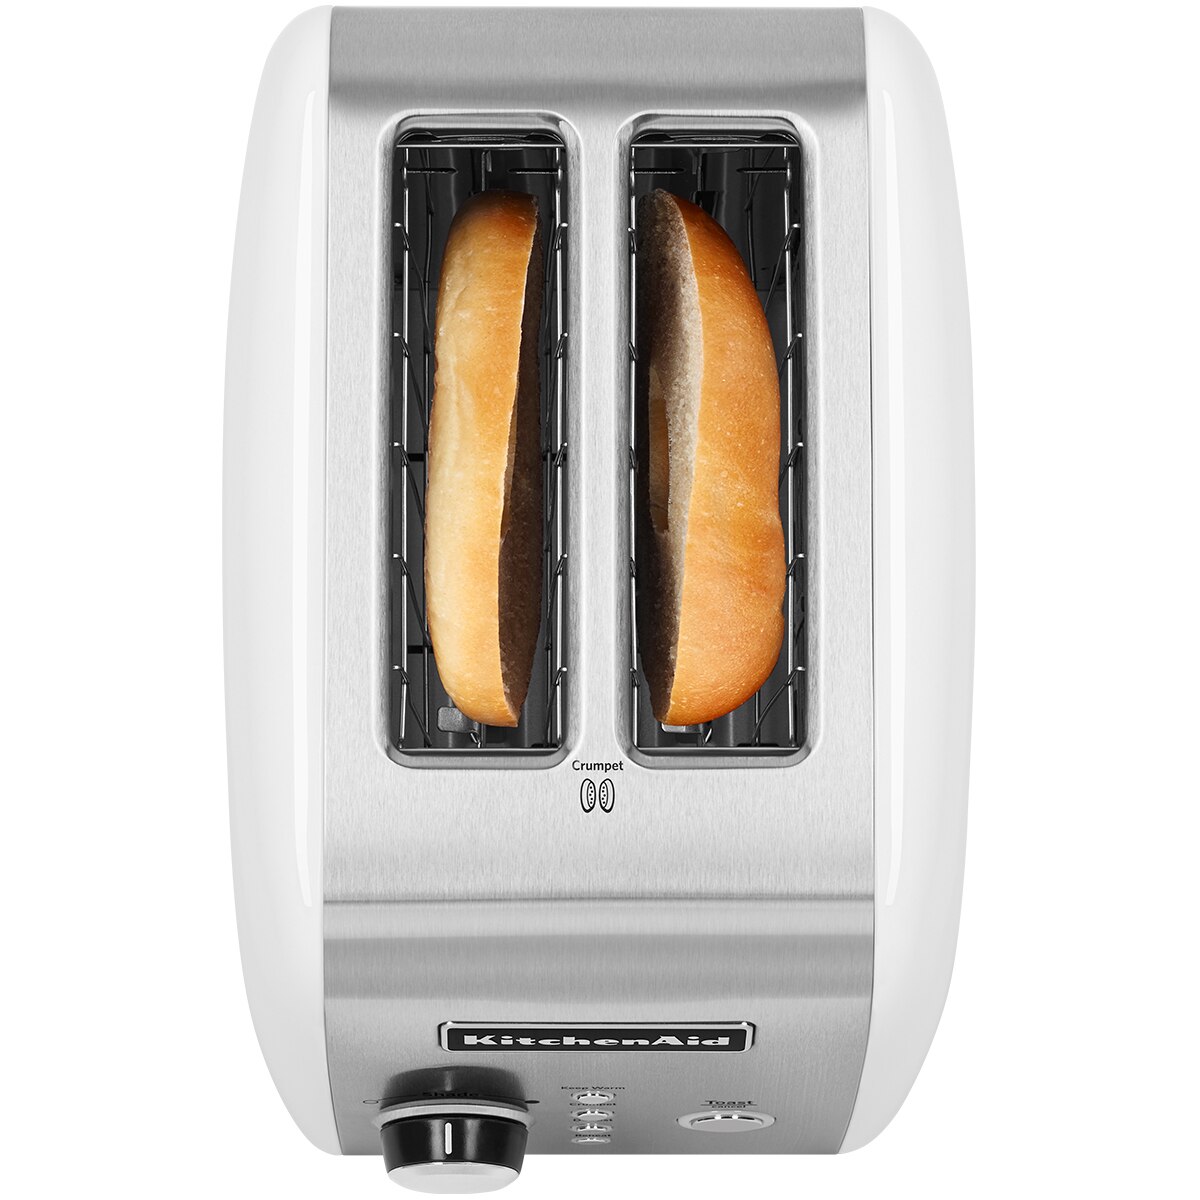 2 Slice Classic Automatic Toaster White